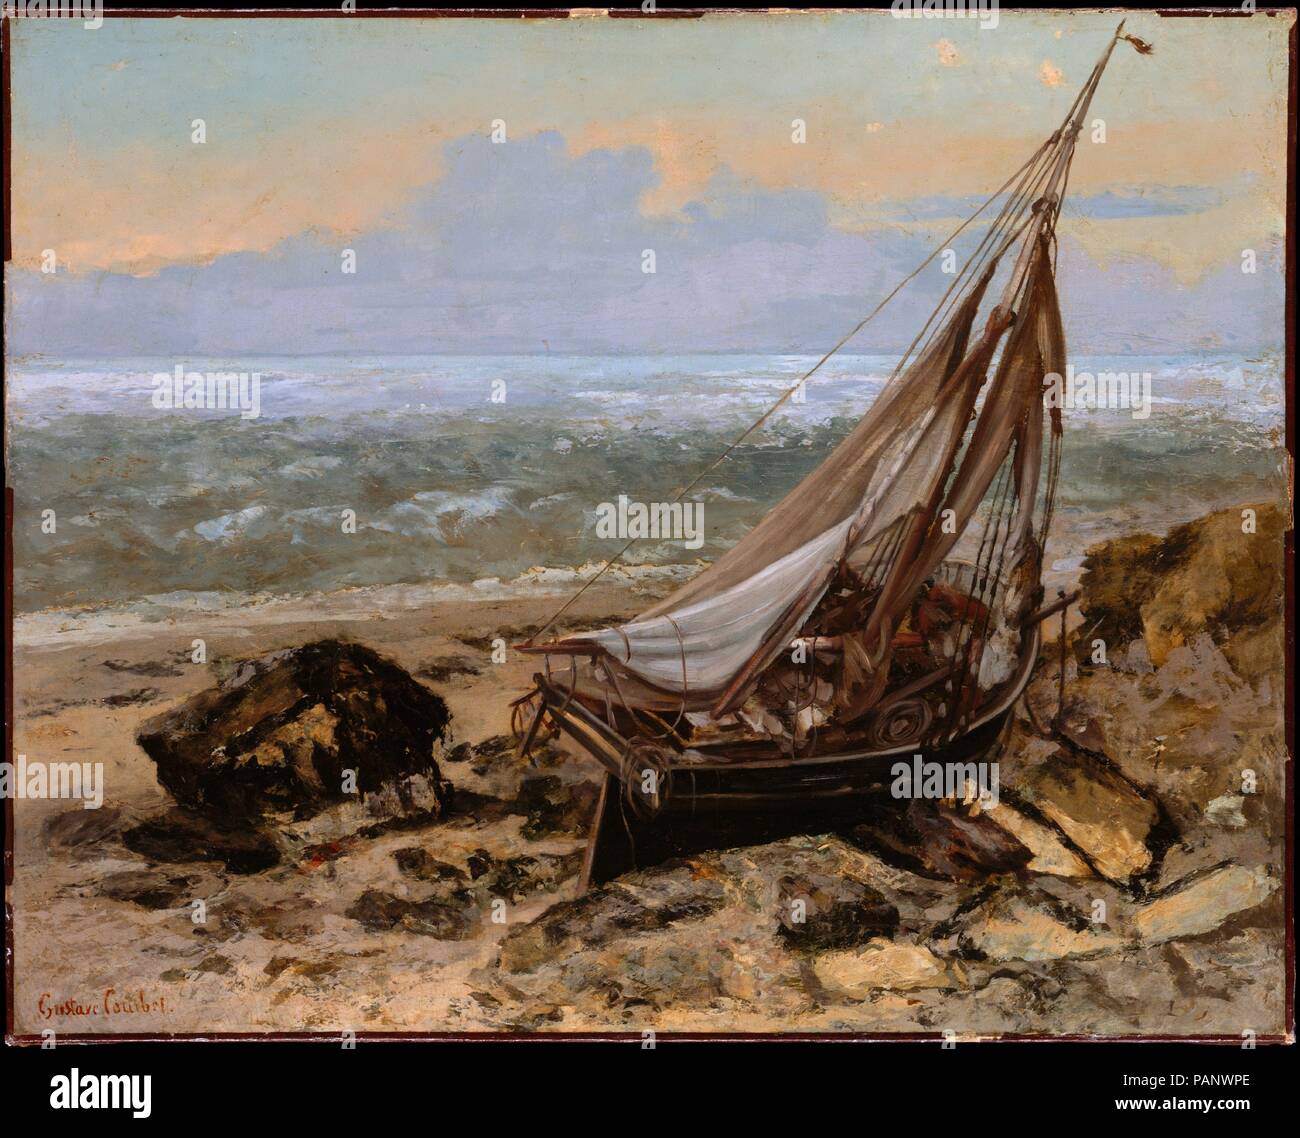 The Fishing Boat. Artist: Gustave Courbet (French, Ornans 1819-1877 La Tour-de-Peilz). Dimensions: 25 1/2 x 32 in. (64.8 x 81.3 cm). Date: 1865.  Courbet painted this work during an intensely productive visit to Trouville with James McNeill Whistler from September until November 1865; in a letter to his father, the artist boasted that he had executed 'thirty-five paintings' in a very short time, which 'stunned everybody.' In his choice of subject, Courbet followed in the wake of Eugène Isabey, Johan Barthold Jongkind, and Eugène Boudin; but unlike many of the canvases executed at the time, thi Stock Photo